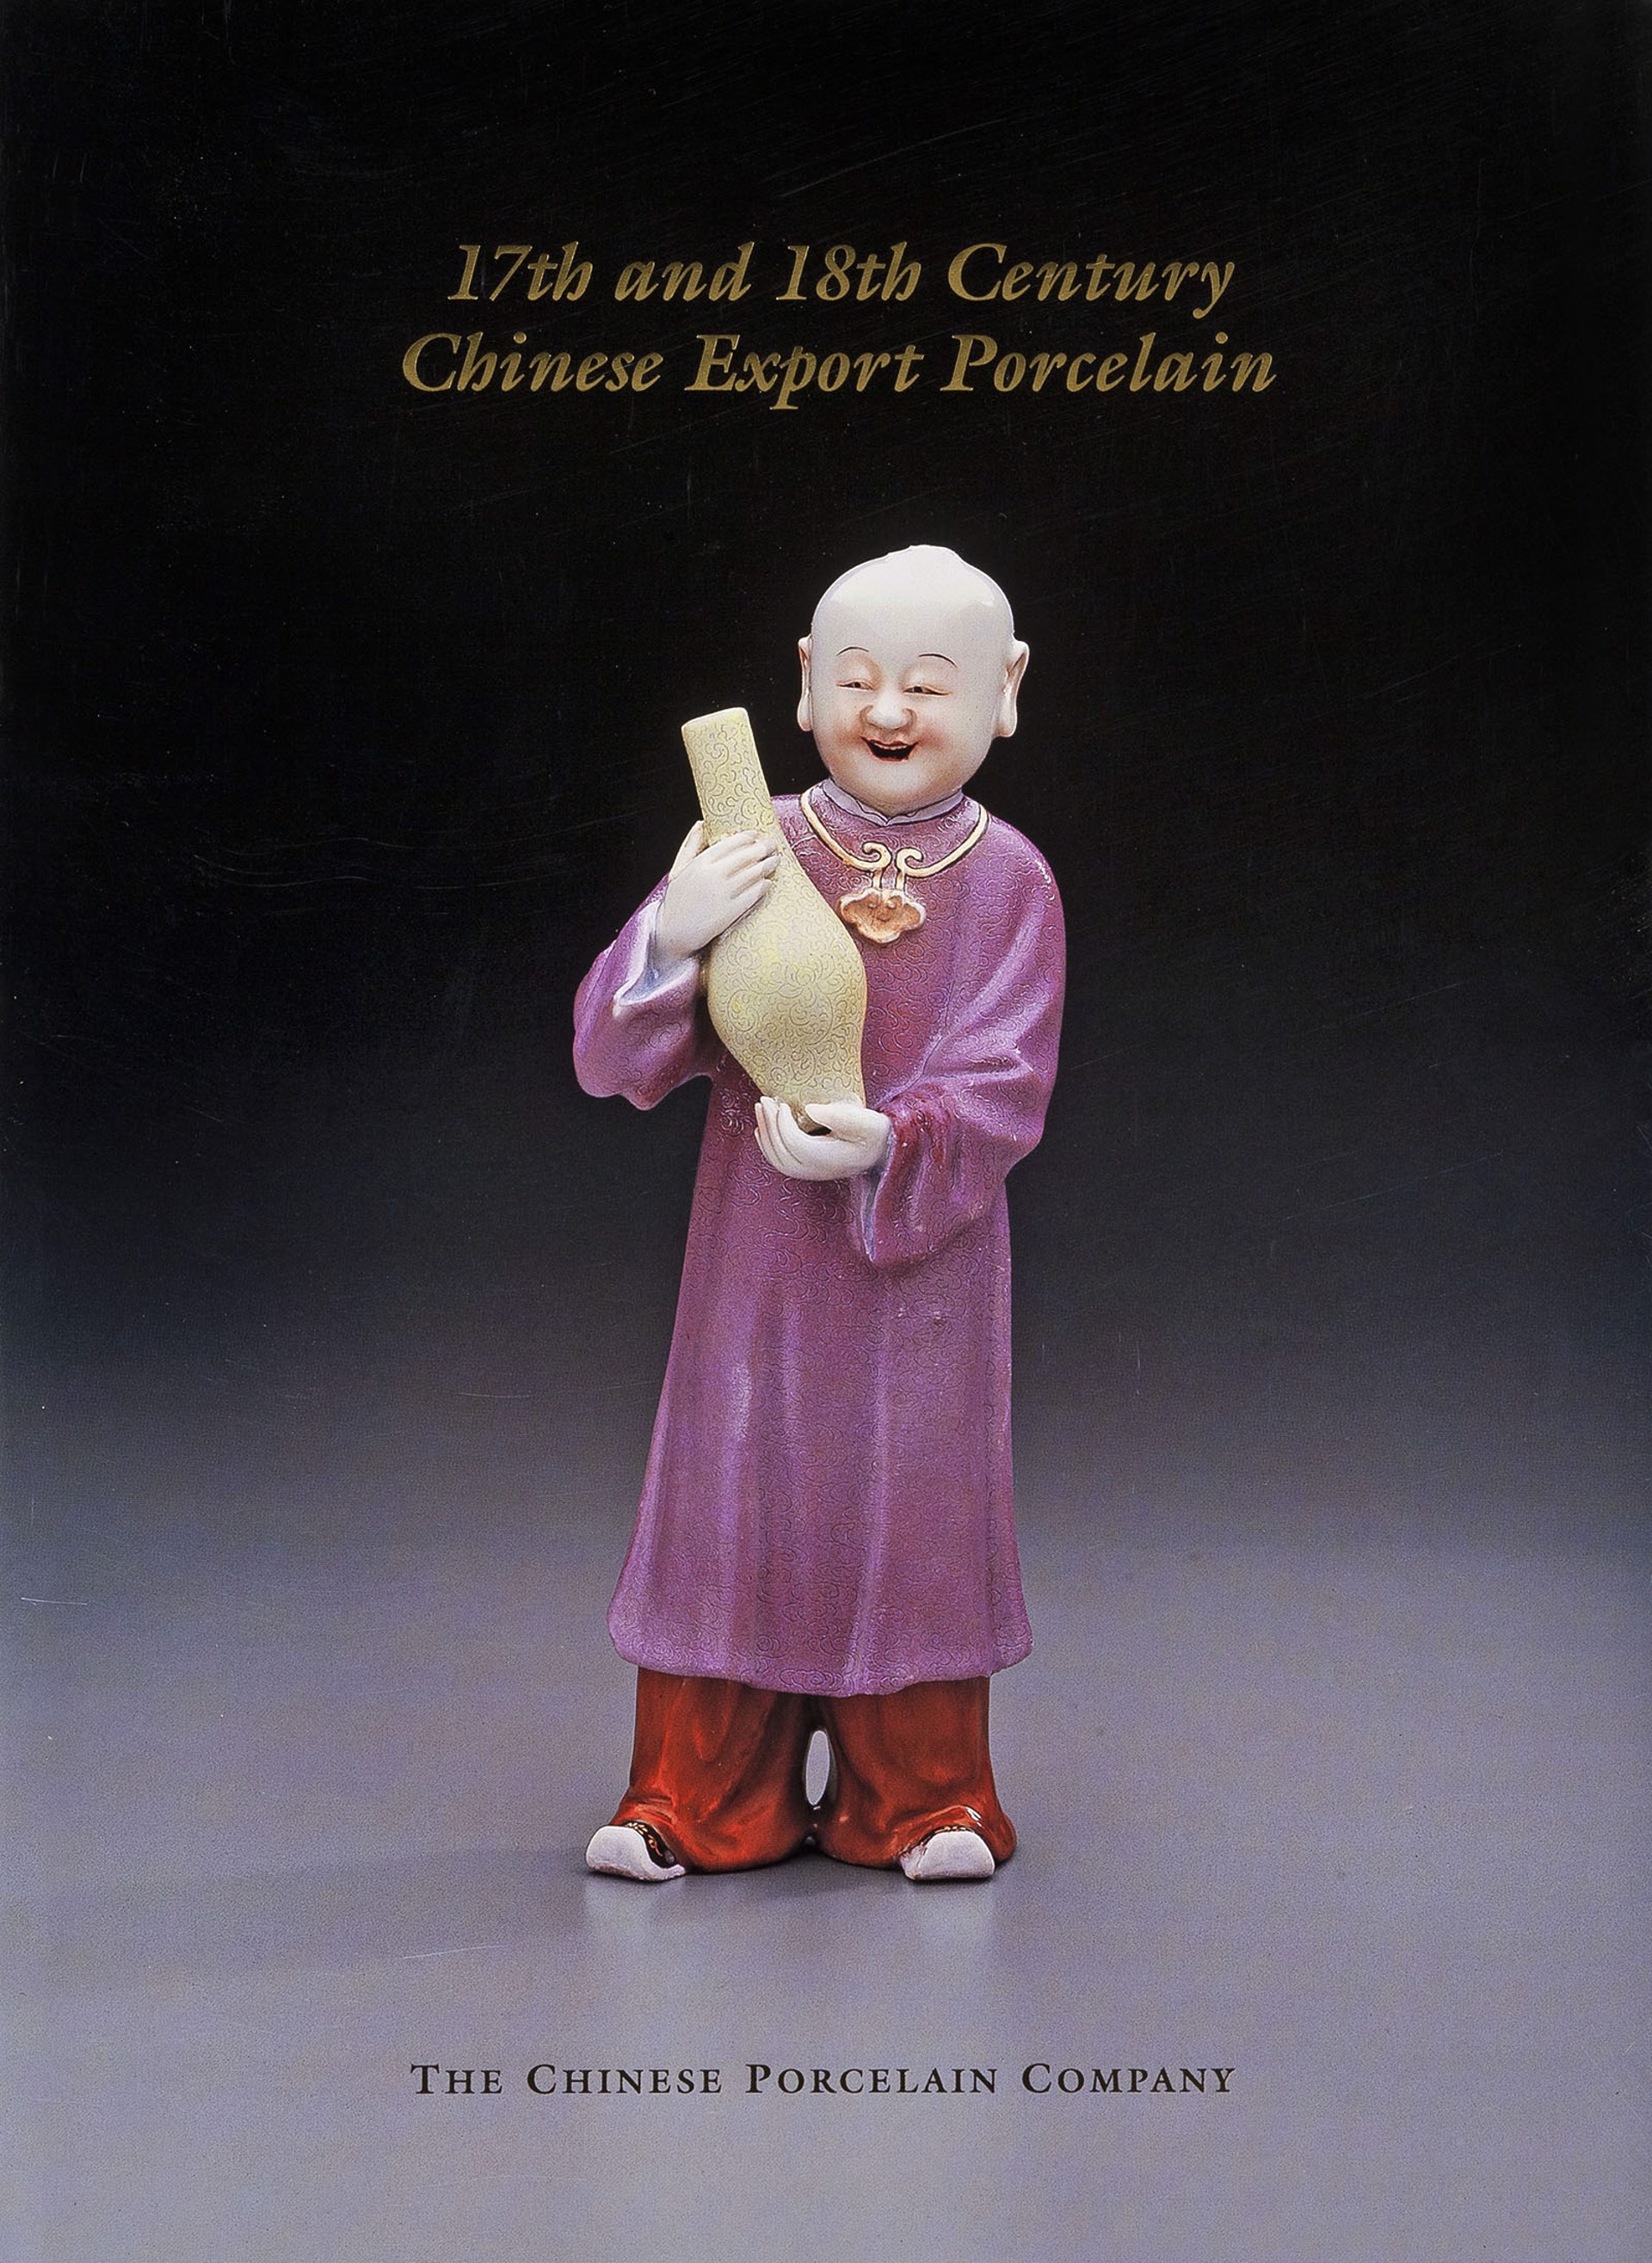 17th and 18th Century Chinese Export Porcelain by Catalog 35